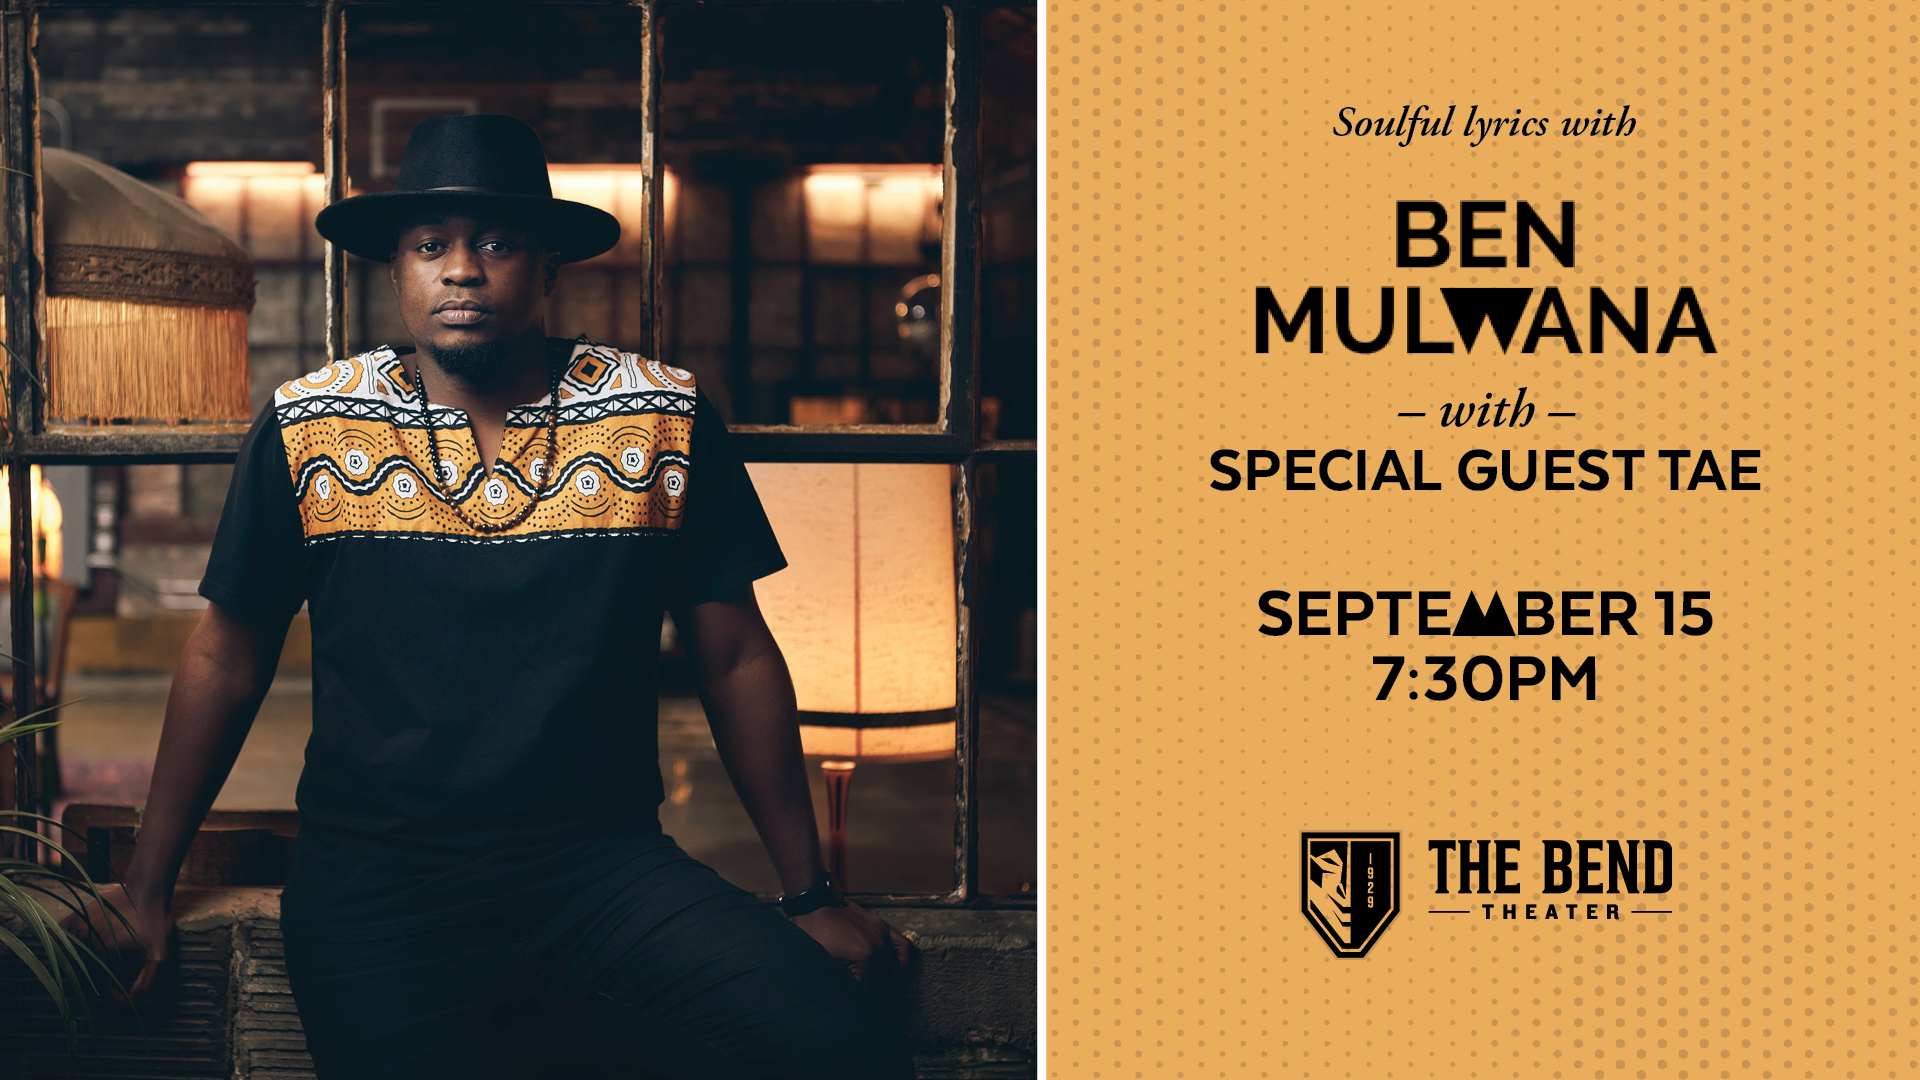 Live Music with Ben Mulwana at The Bend Theater